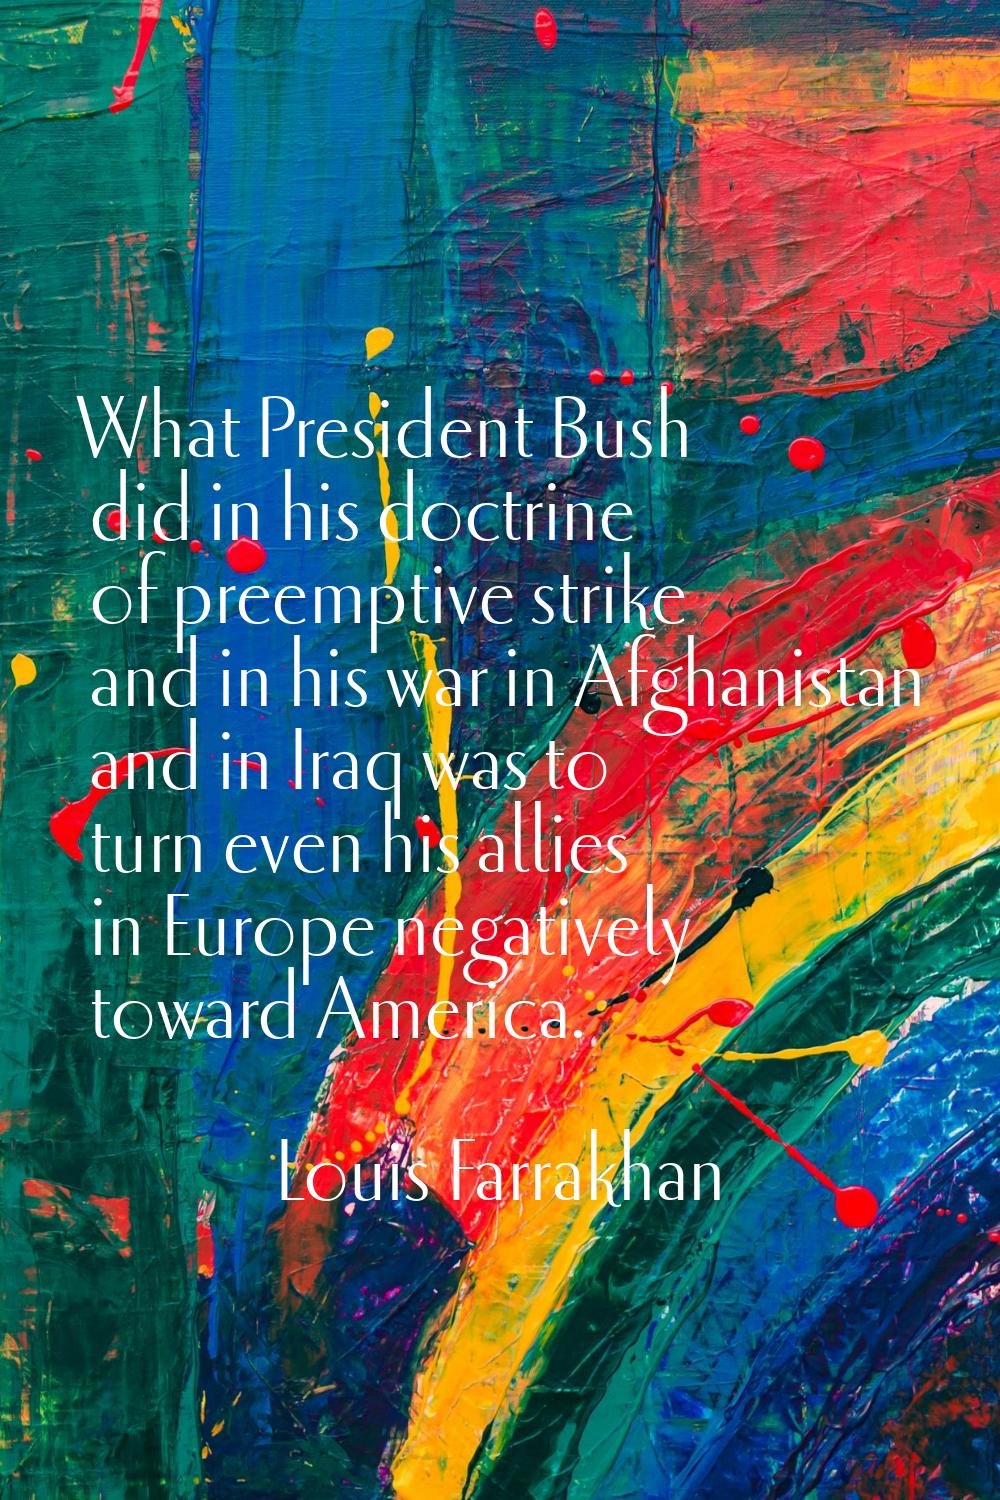 What President Bush did in his doctrine of preemptive strike and in his war in Afghanistan and in I